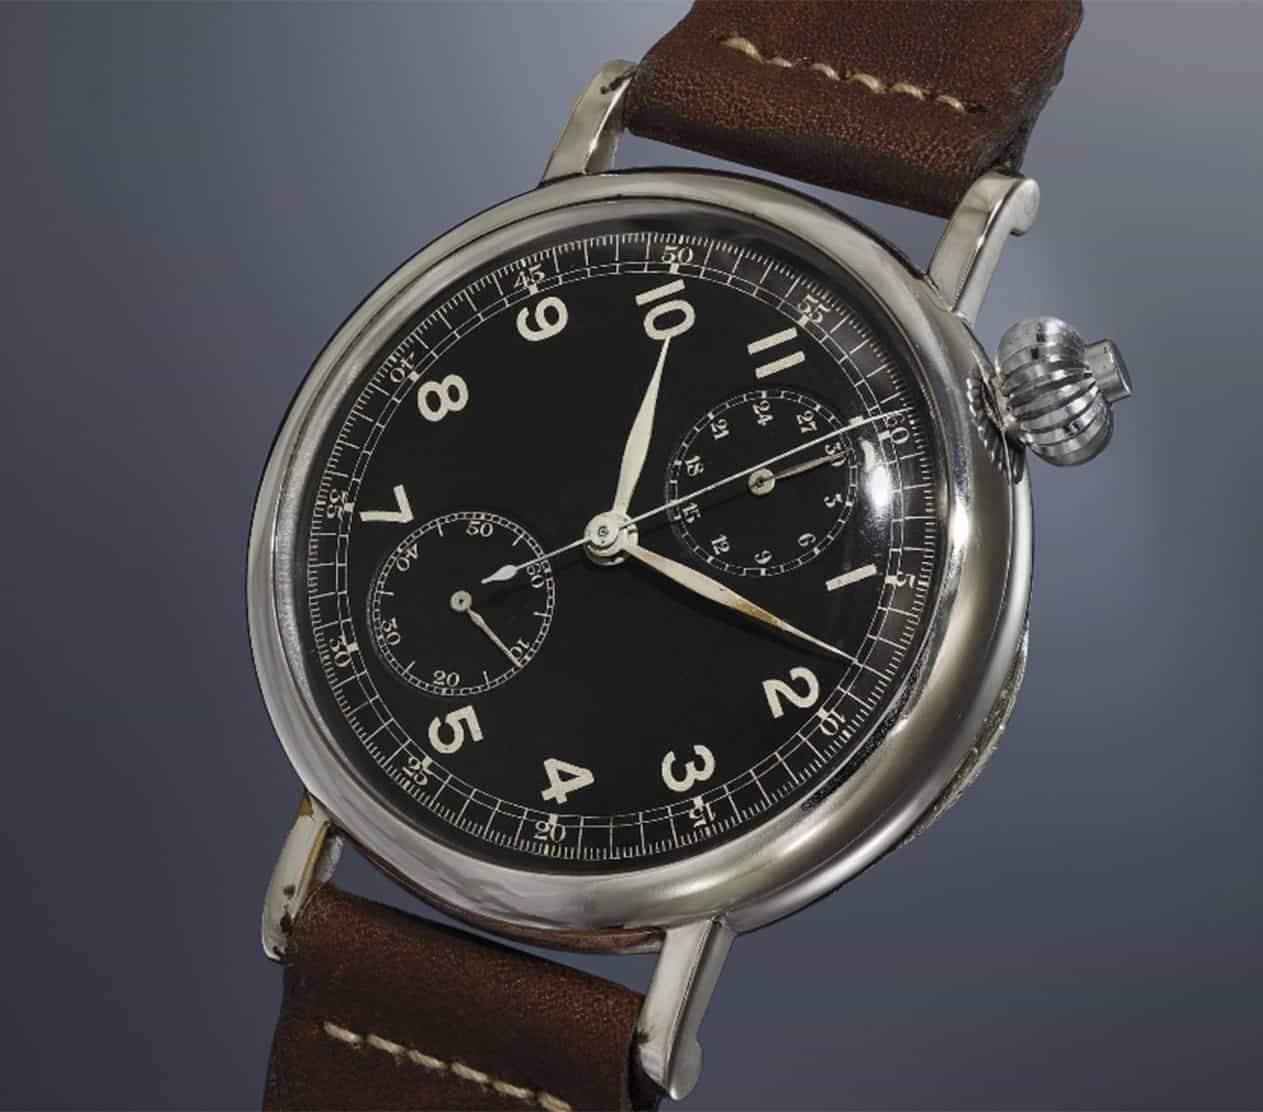 From the Archives: A Look at American Military Watches